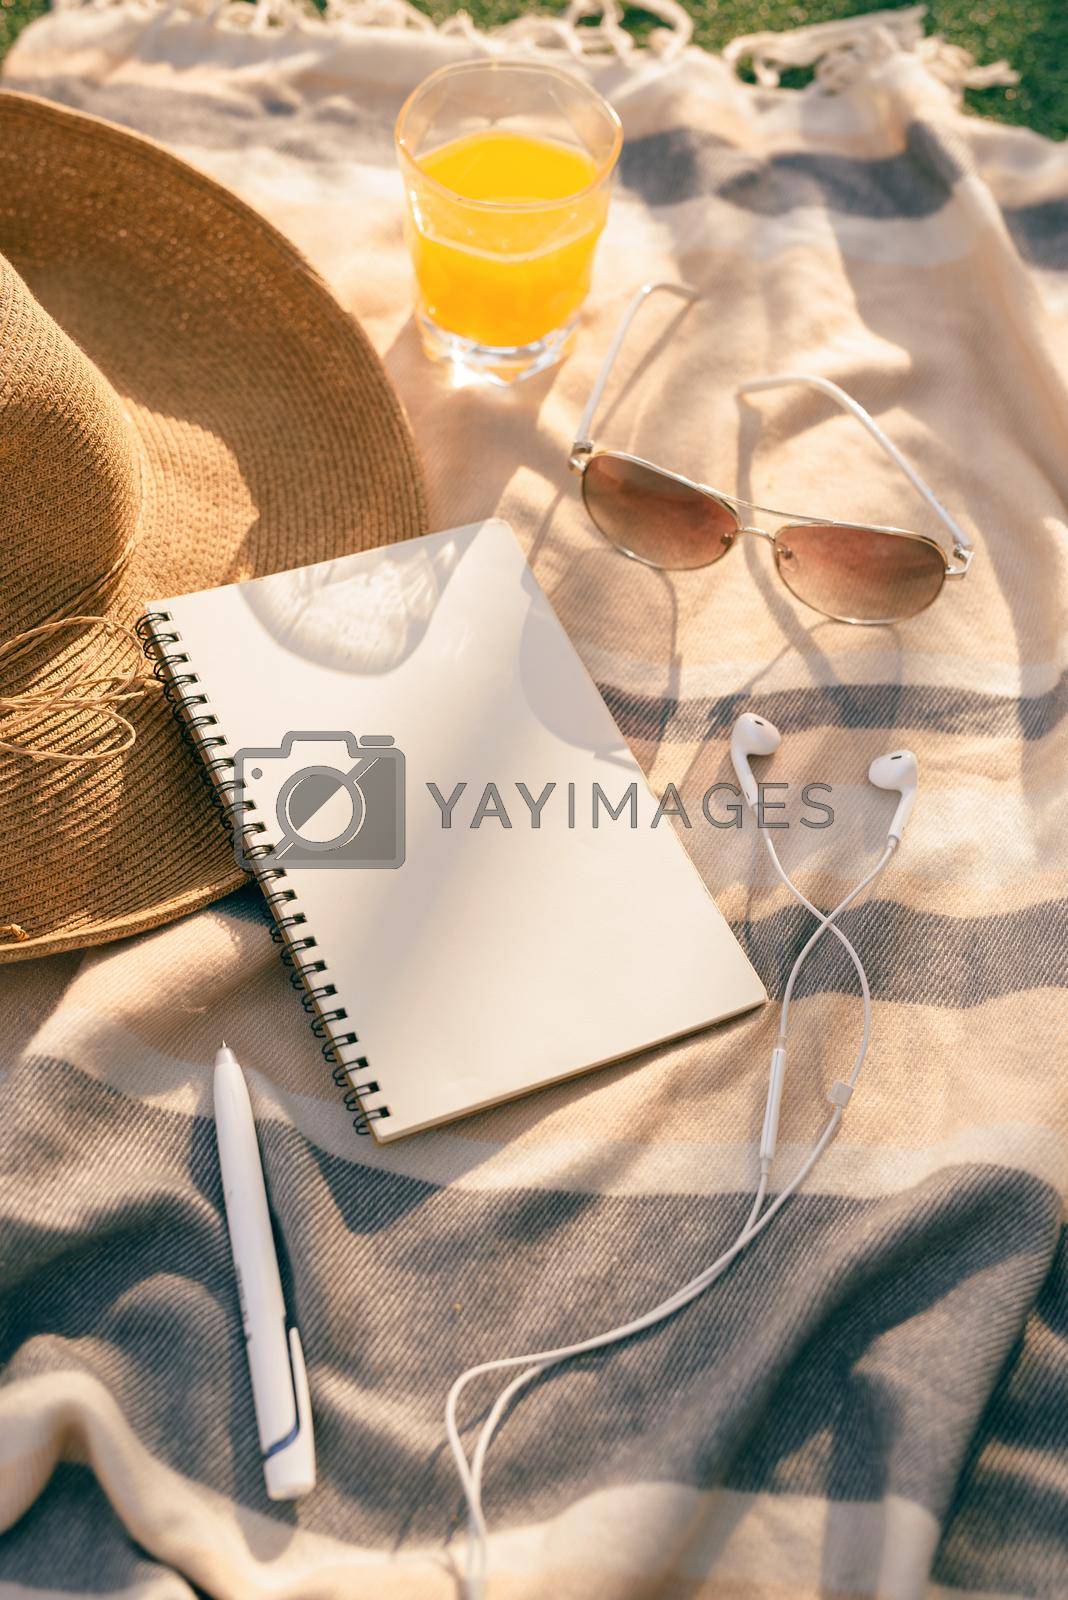 Royalty free image of summer picnic in nature with diary and fruits by makidotvn